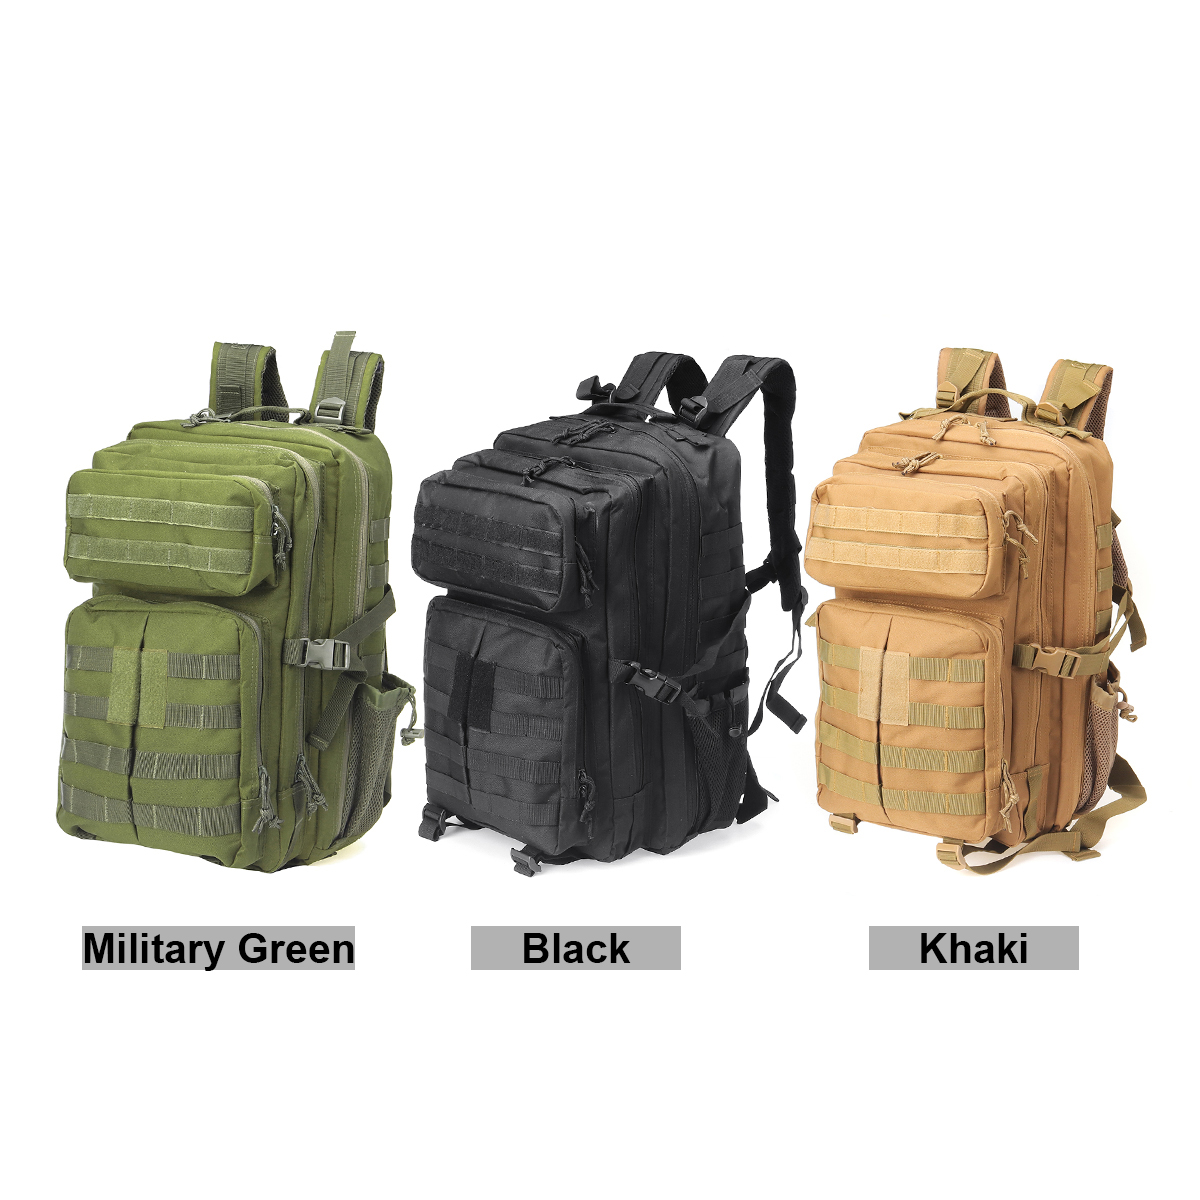 45L-900D-Waterproof-Tactical-Backpack-Oxford-Cloth-Molle-Military-Outdoor-Bag-Traveling-Camping-Hiki-1560781-10